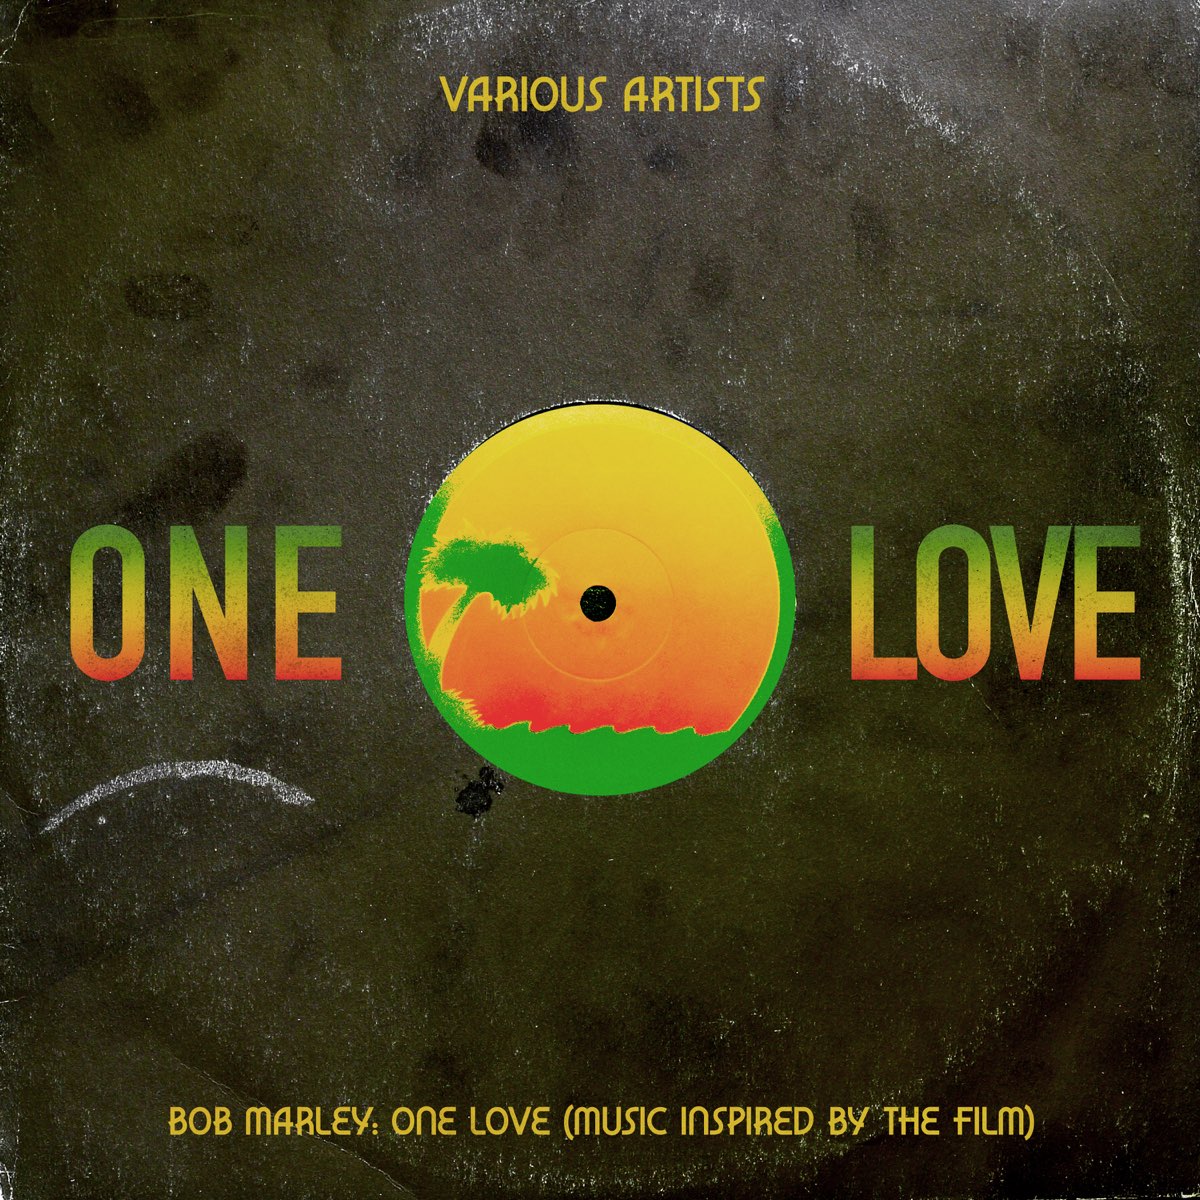 One Love (Bob Marley: One Love - Music Inspired By The Film) - Single -  Album by Wizkid - Apple Music